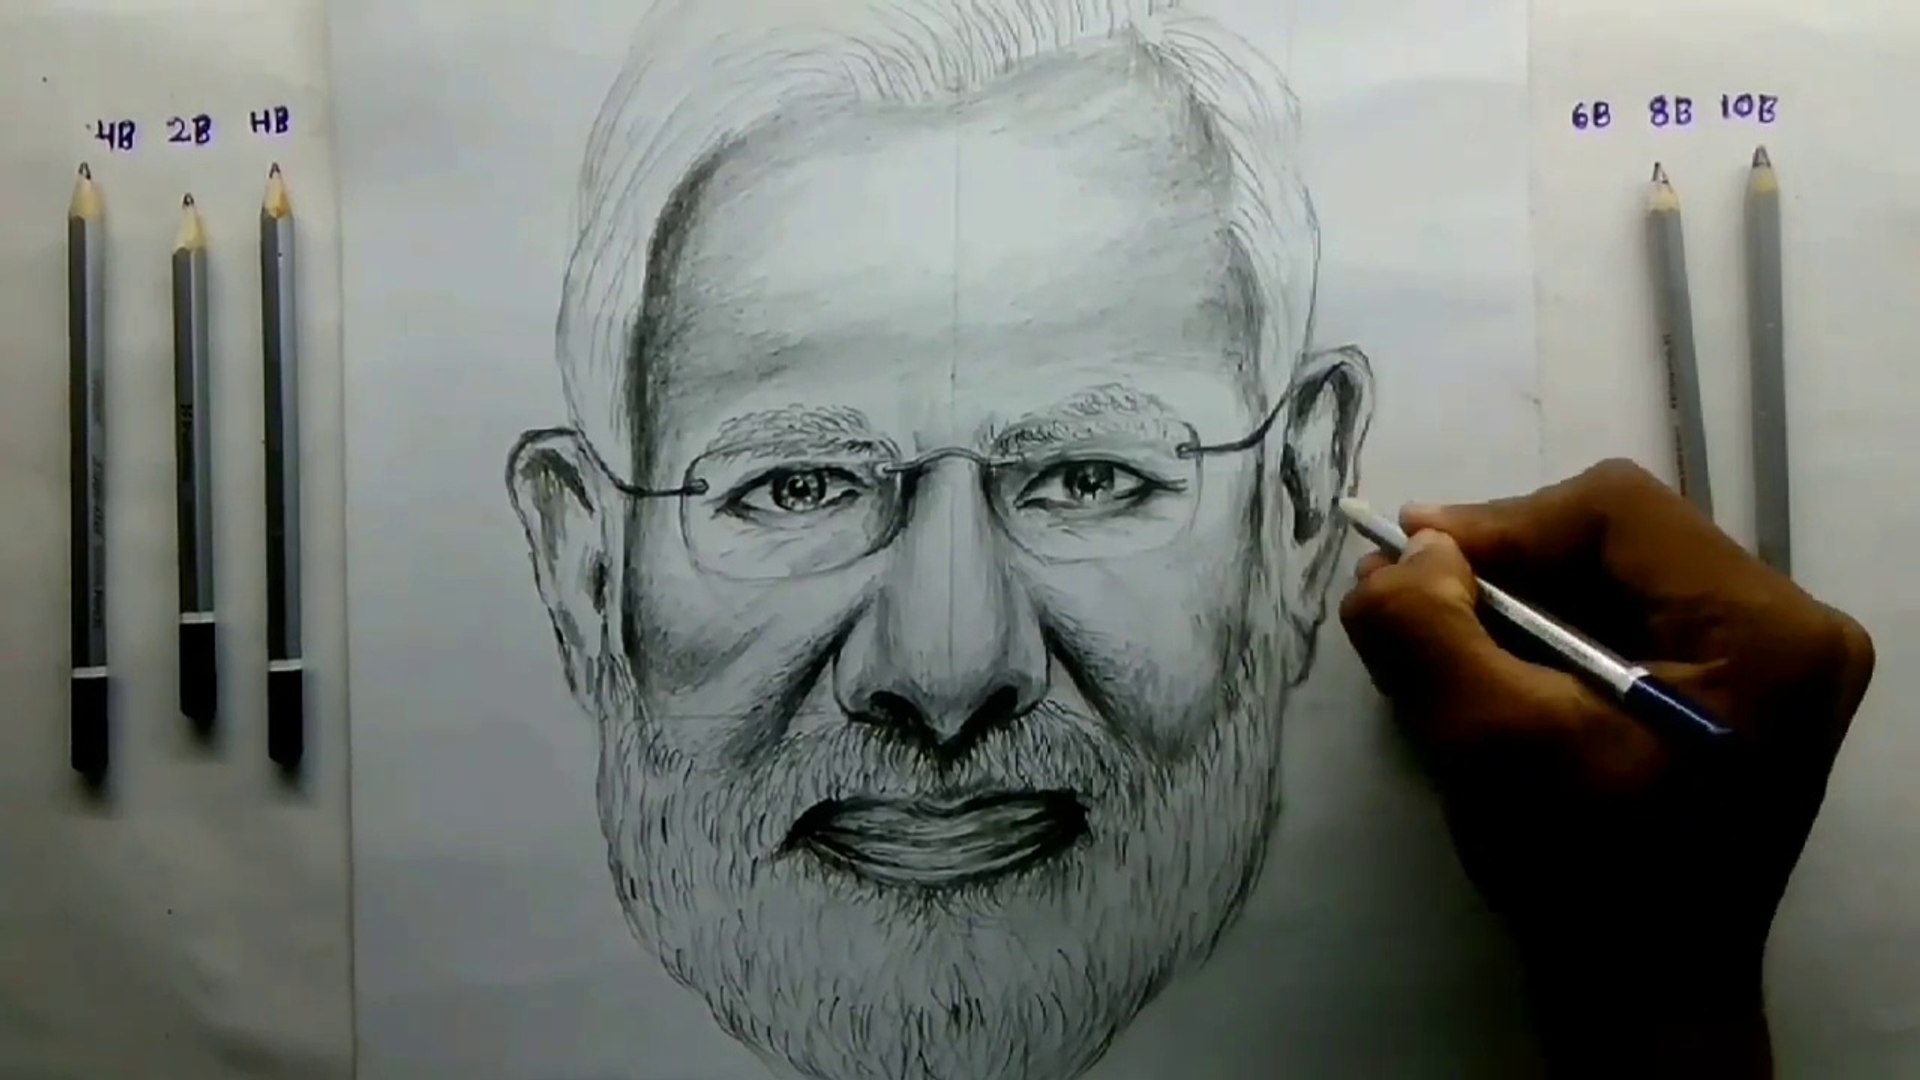 How to draw Narendra Modi step by step tutorial for beginners - video  Dailymotion